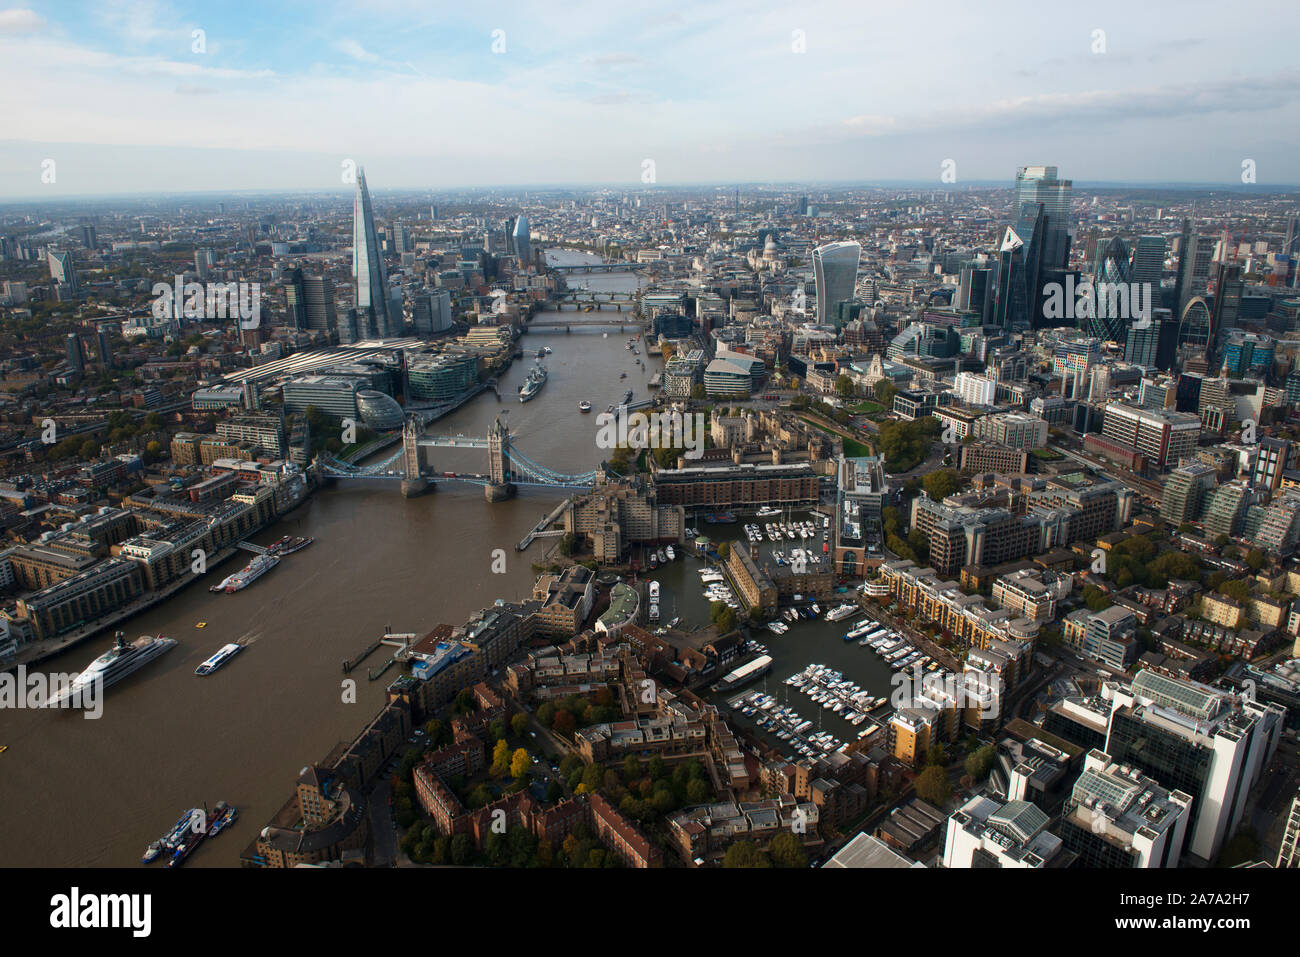 An aerial view of the City of London with Tower Bridge and St Katherines Dock in the foreground. Stock Photo